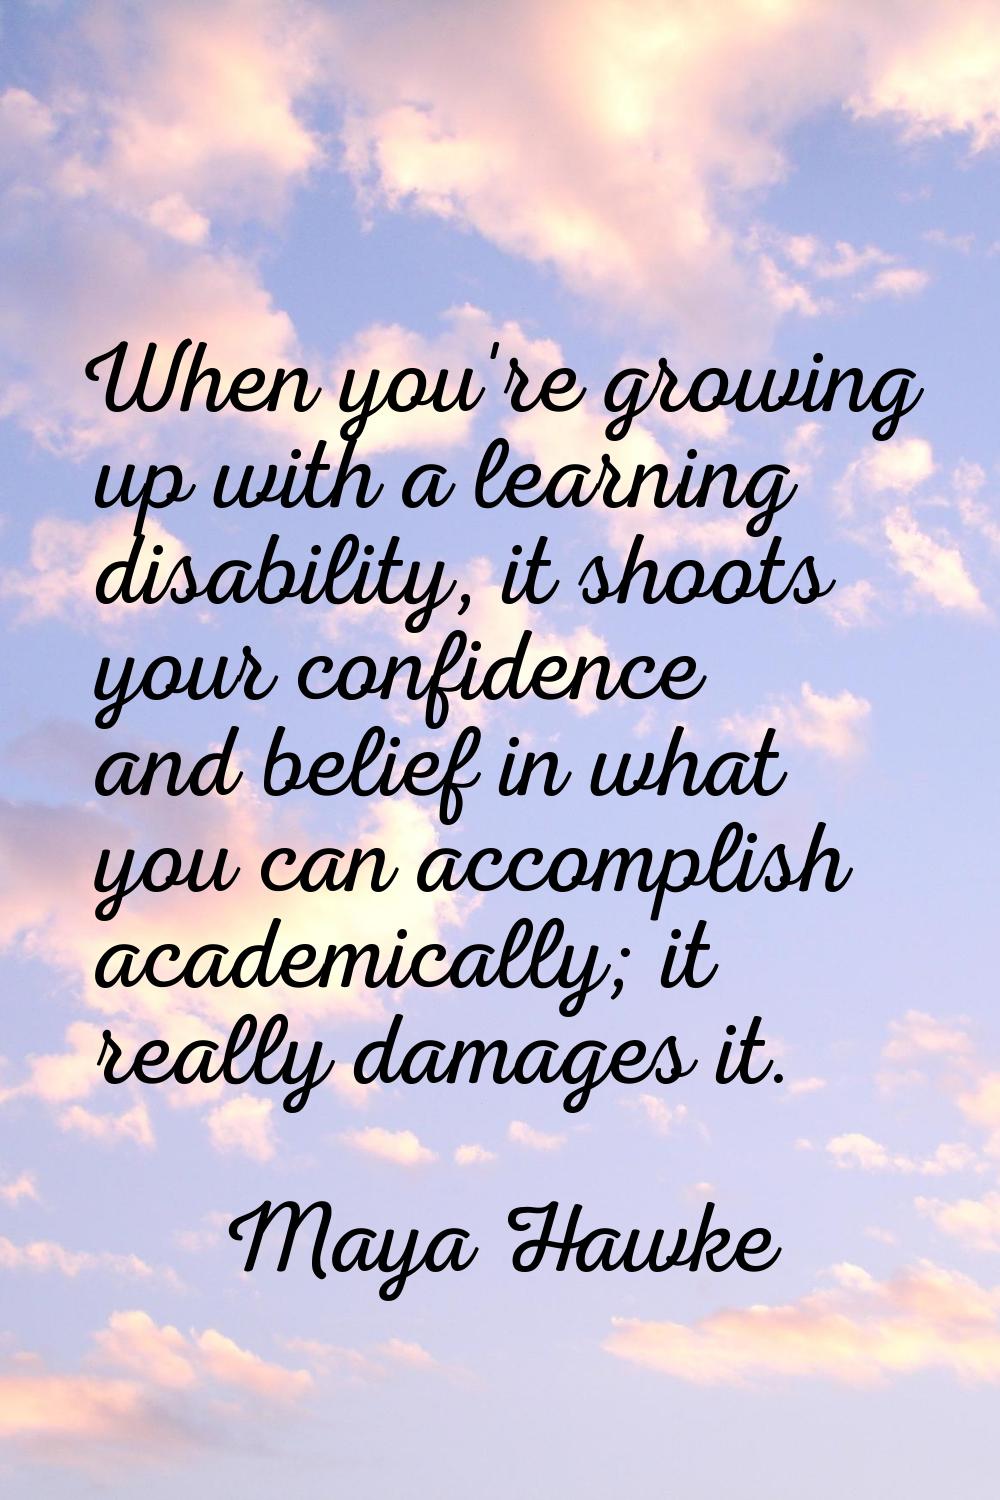 When you're growing up with a learning disability, it shoots your confidence and belief in what you